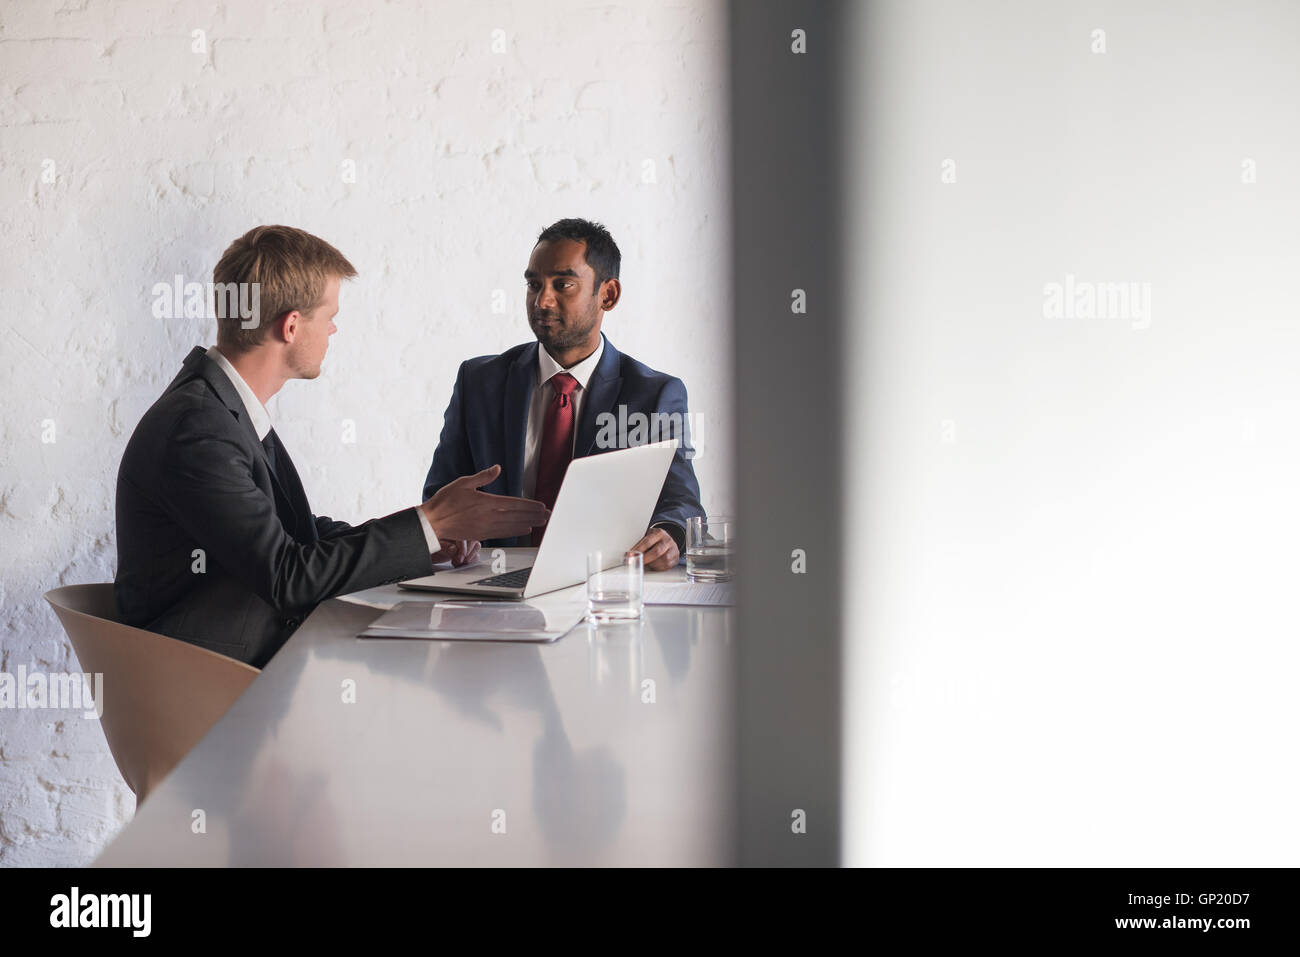 Getting down to the business of negotiating Stock Photo